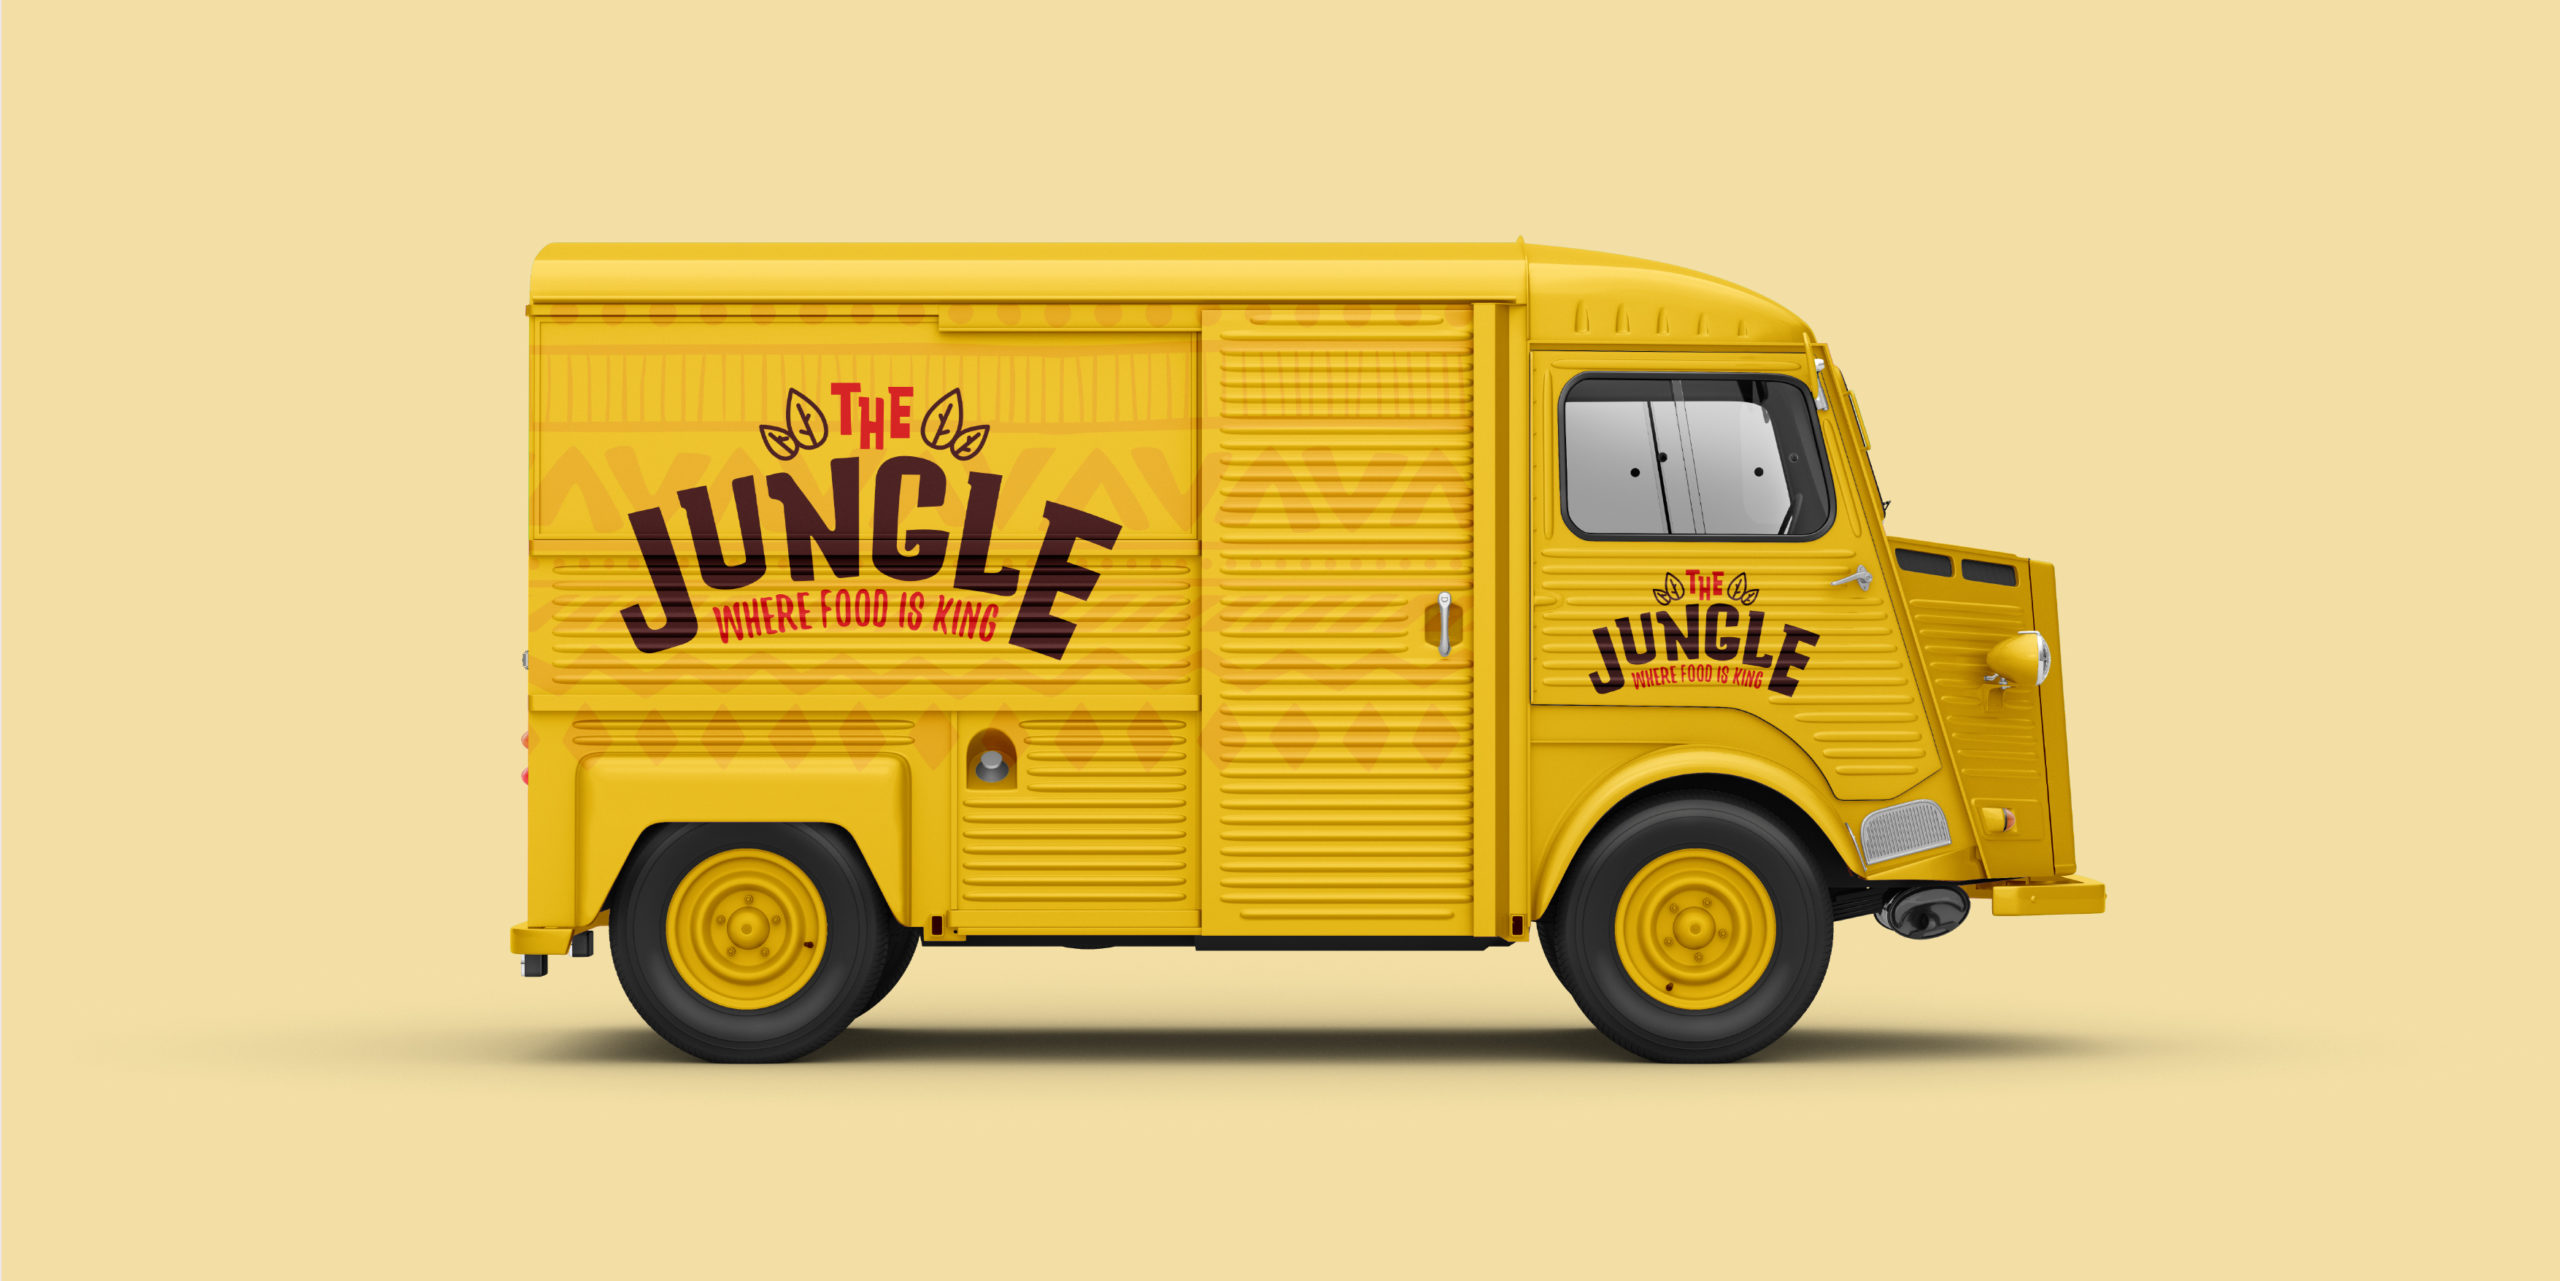 The Jungle - Nigerian Stew Brand and Packaging Design